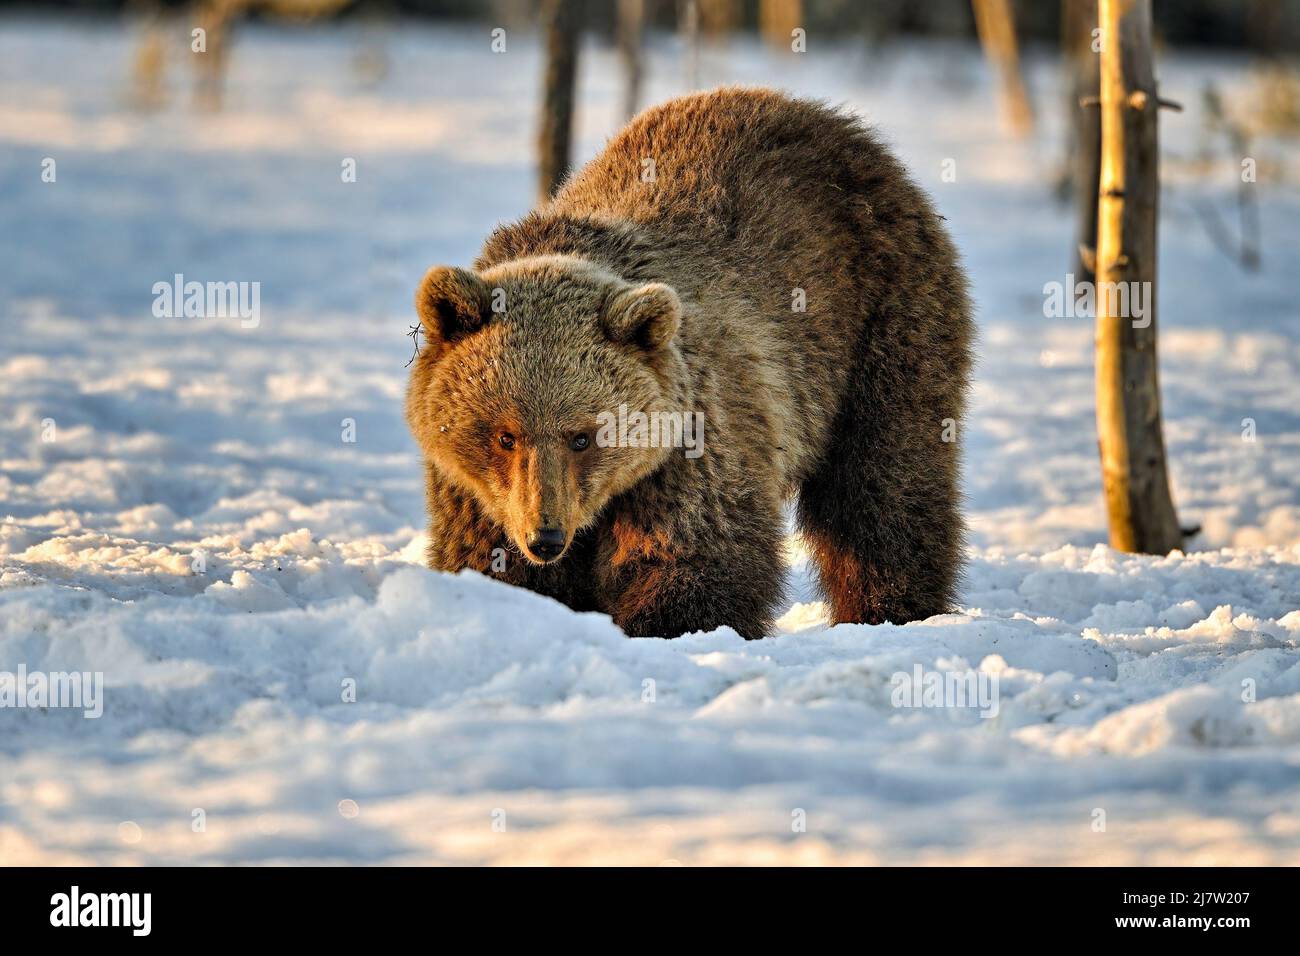 Food is scarce in springtime when ground is frozen and you are hungry after hibernation. Stock Photo